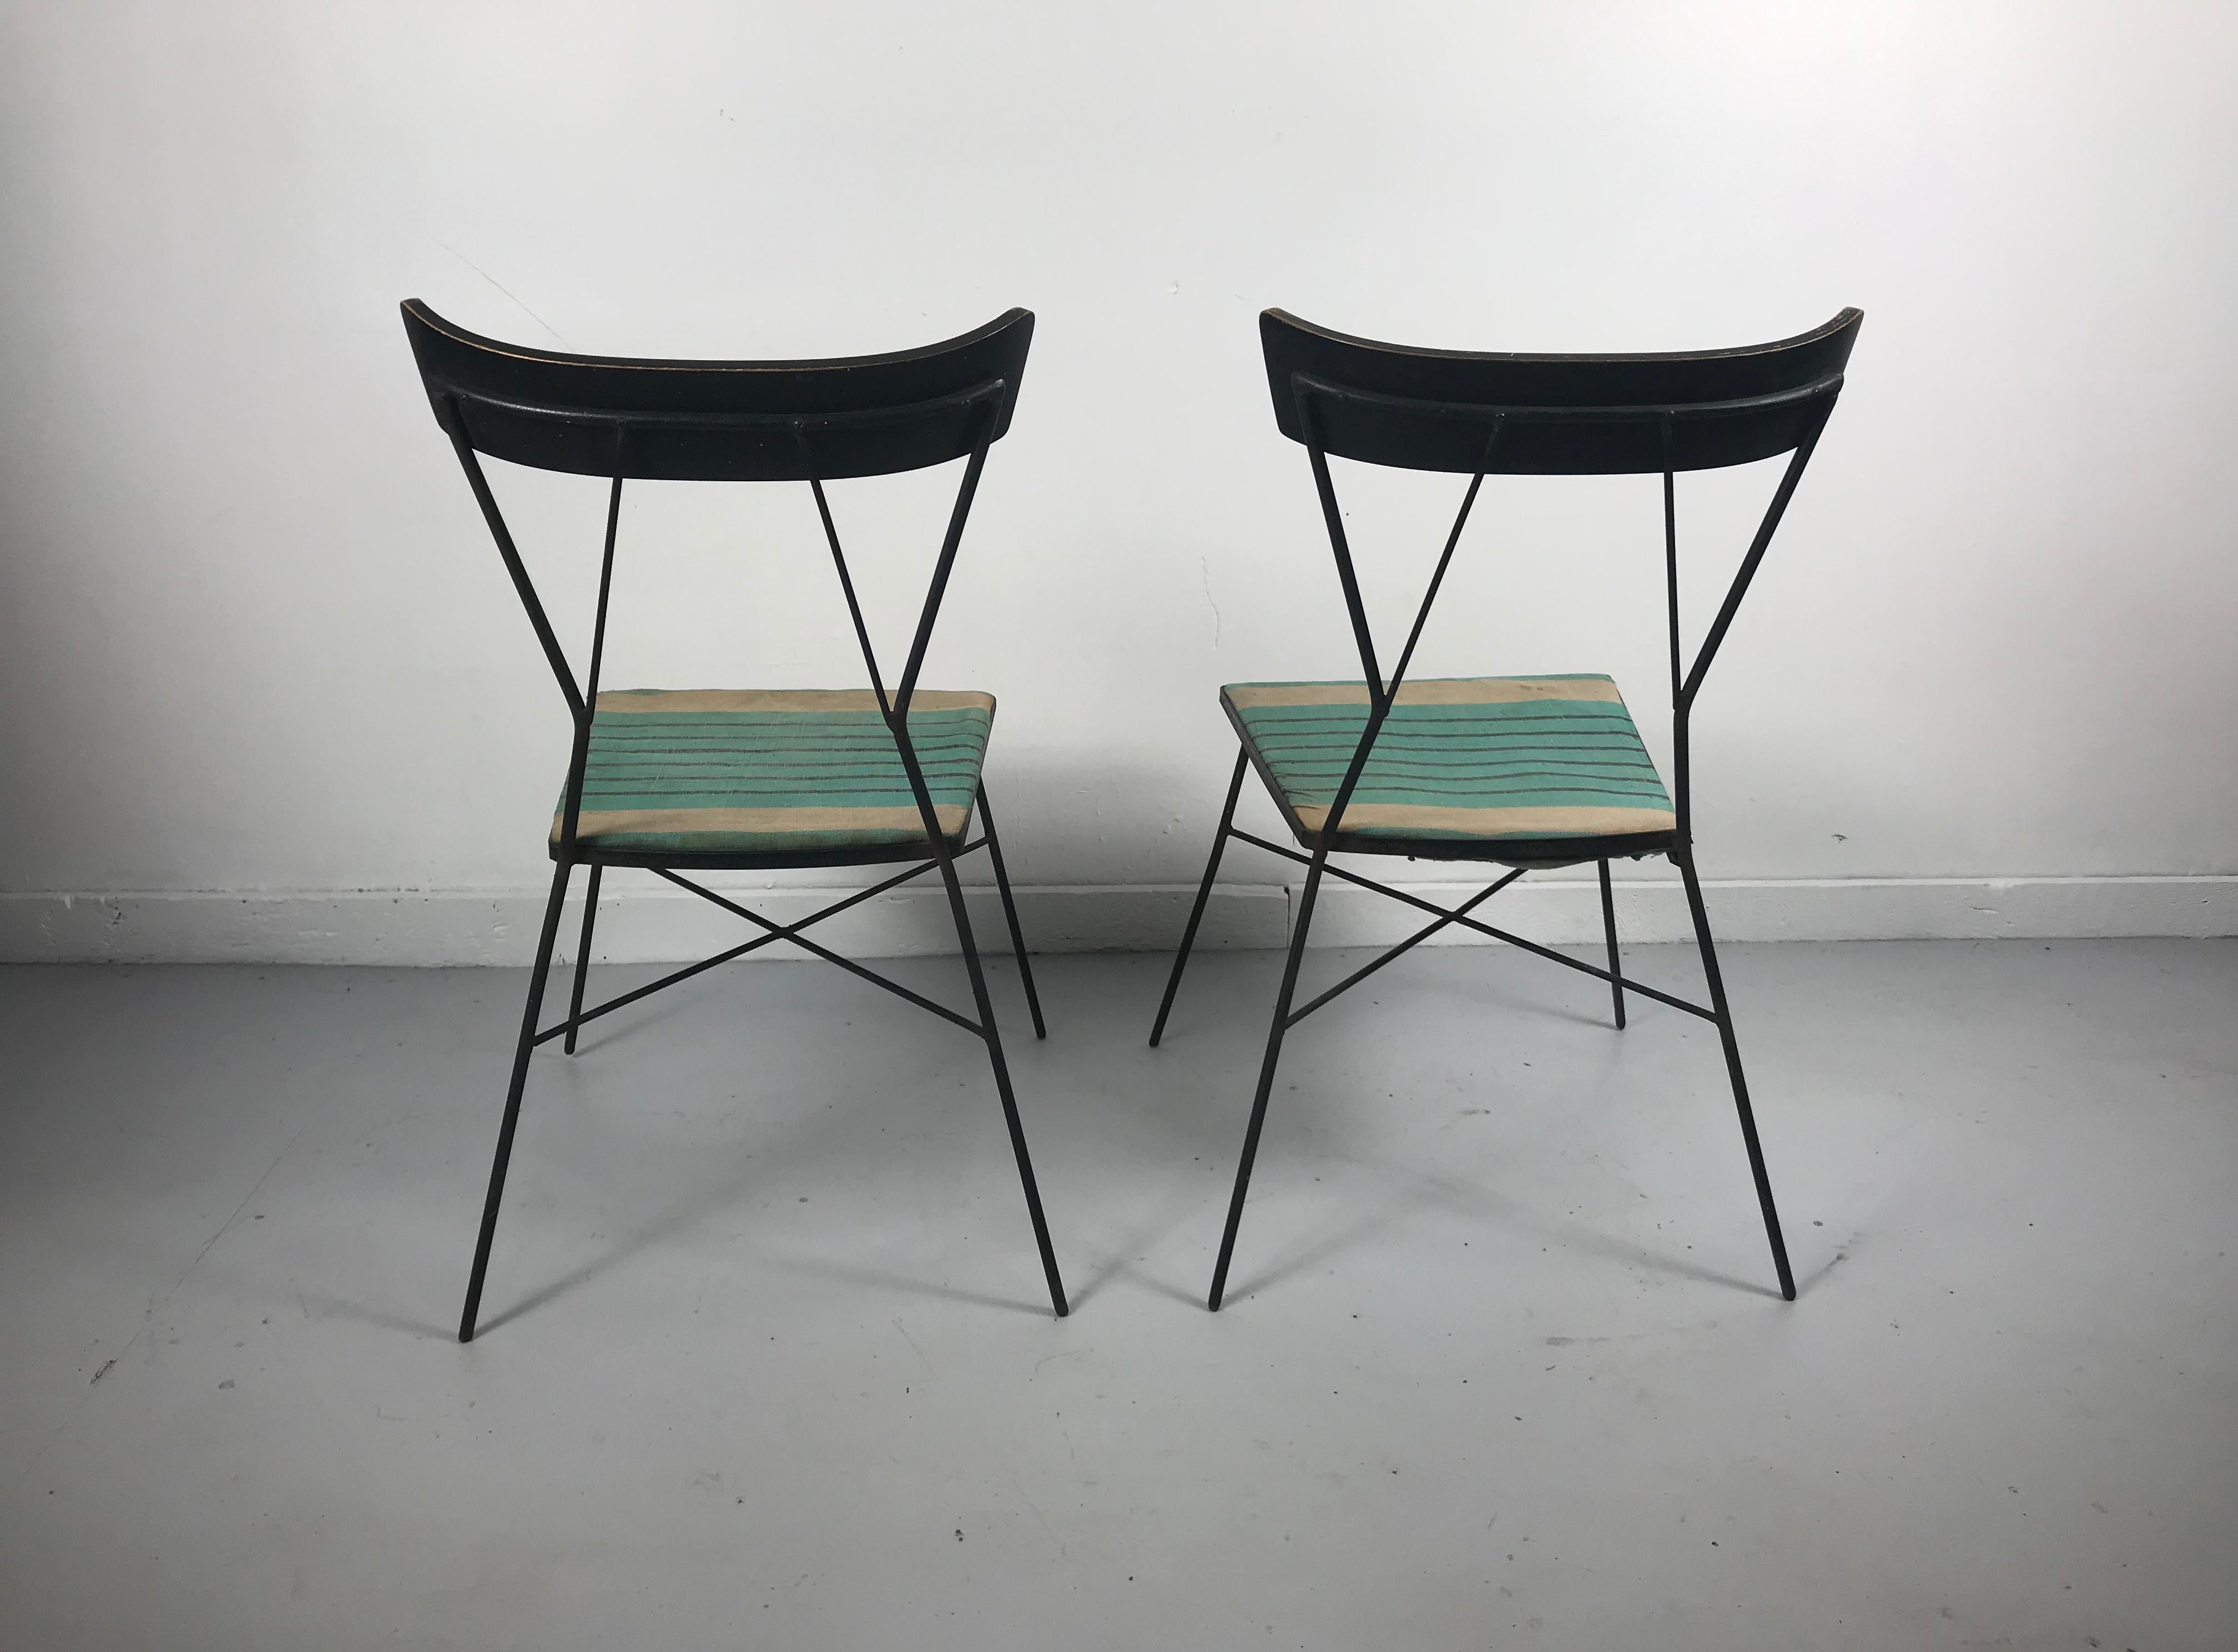 20th Century Rare Group 76 Chairs by Paul McCobb for Arbuck